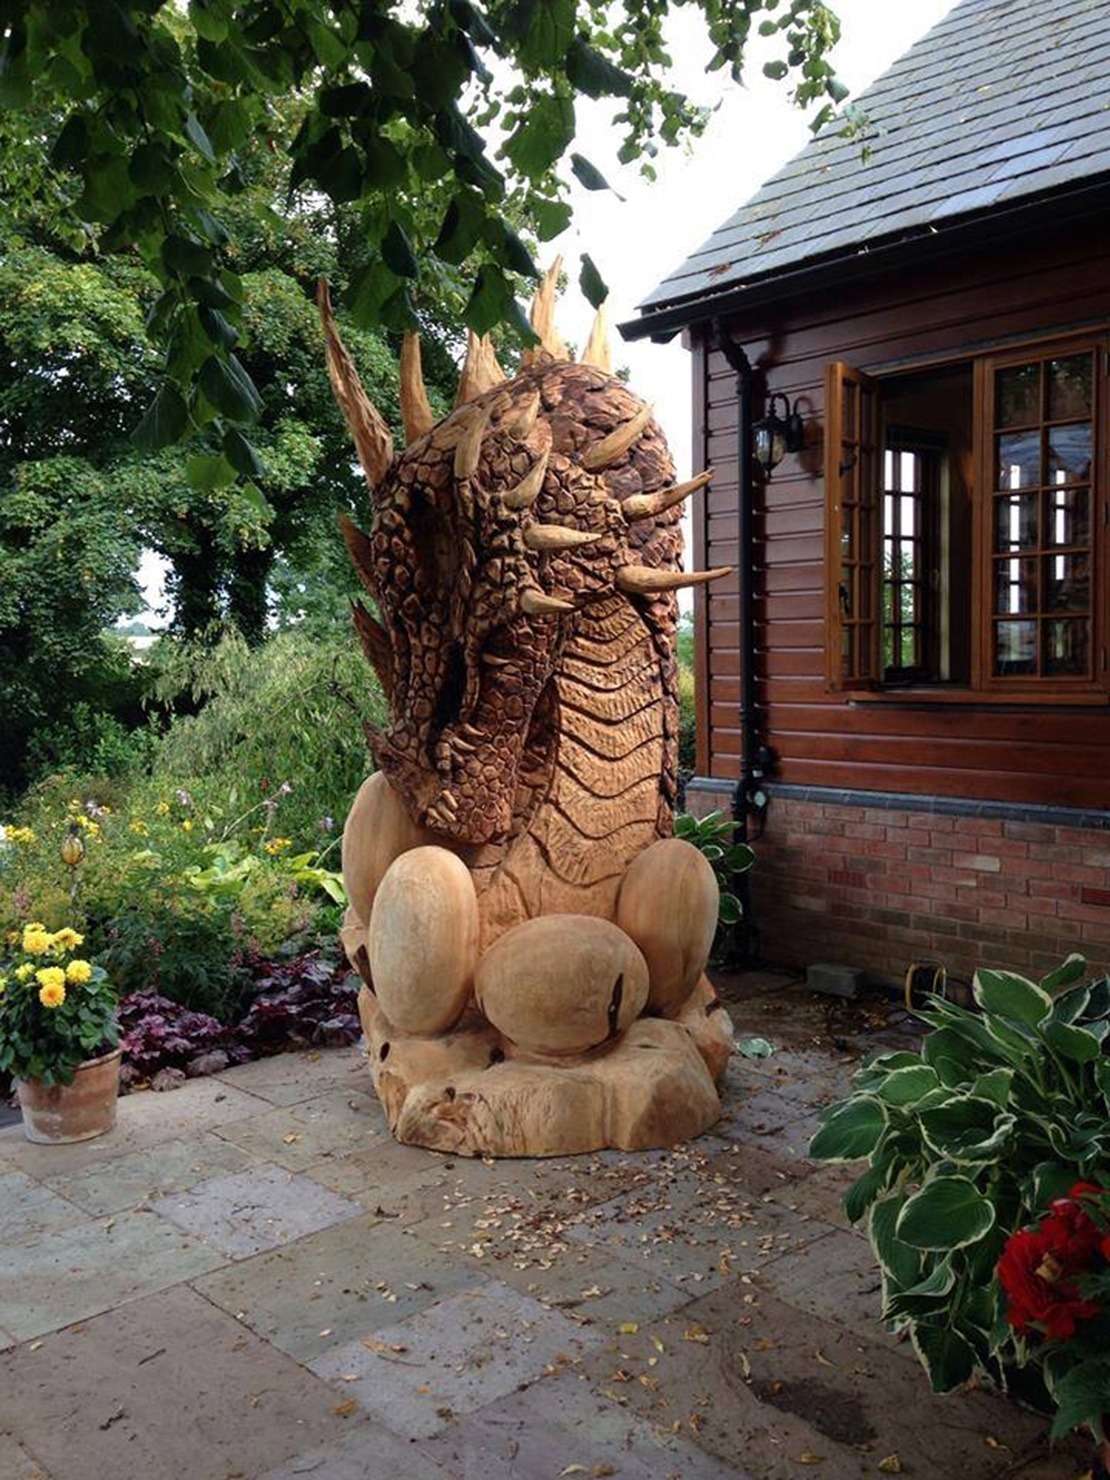 Dragon's head with eggs, carved at the English Open 2015